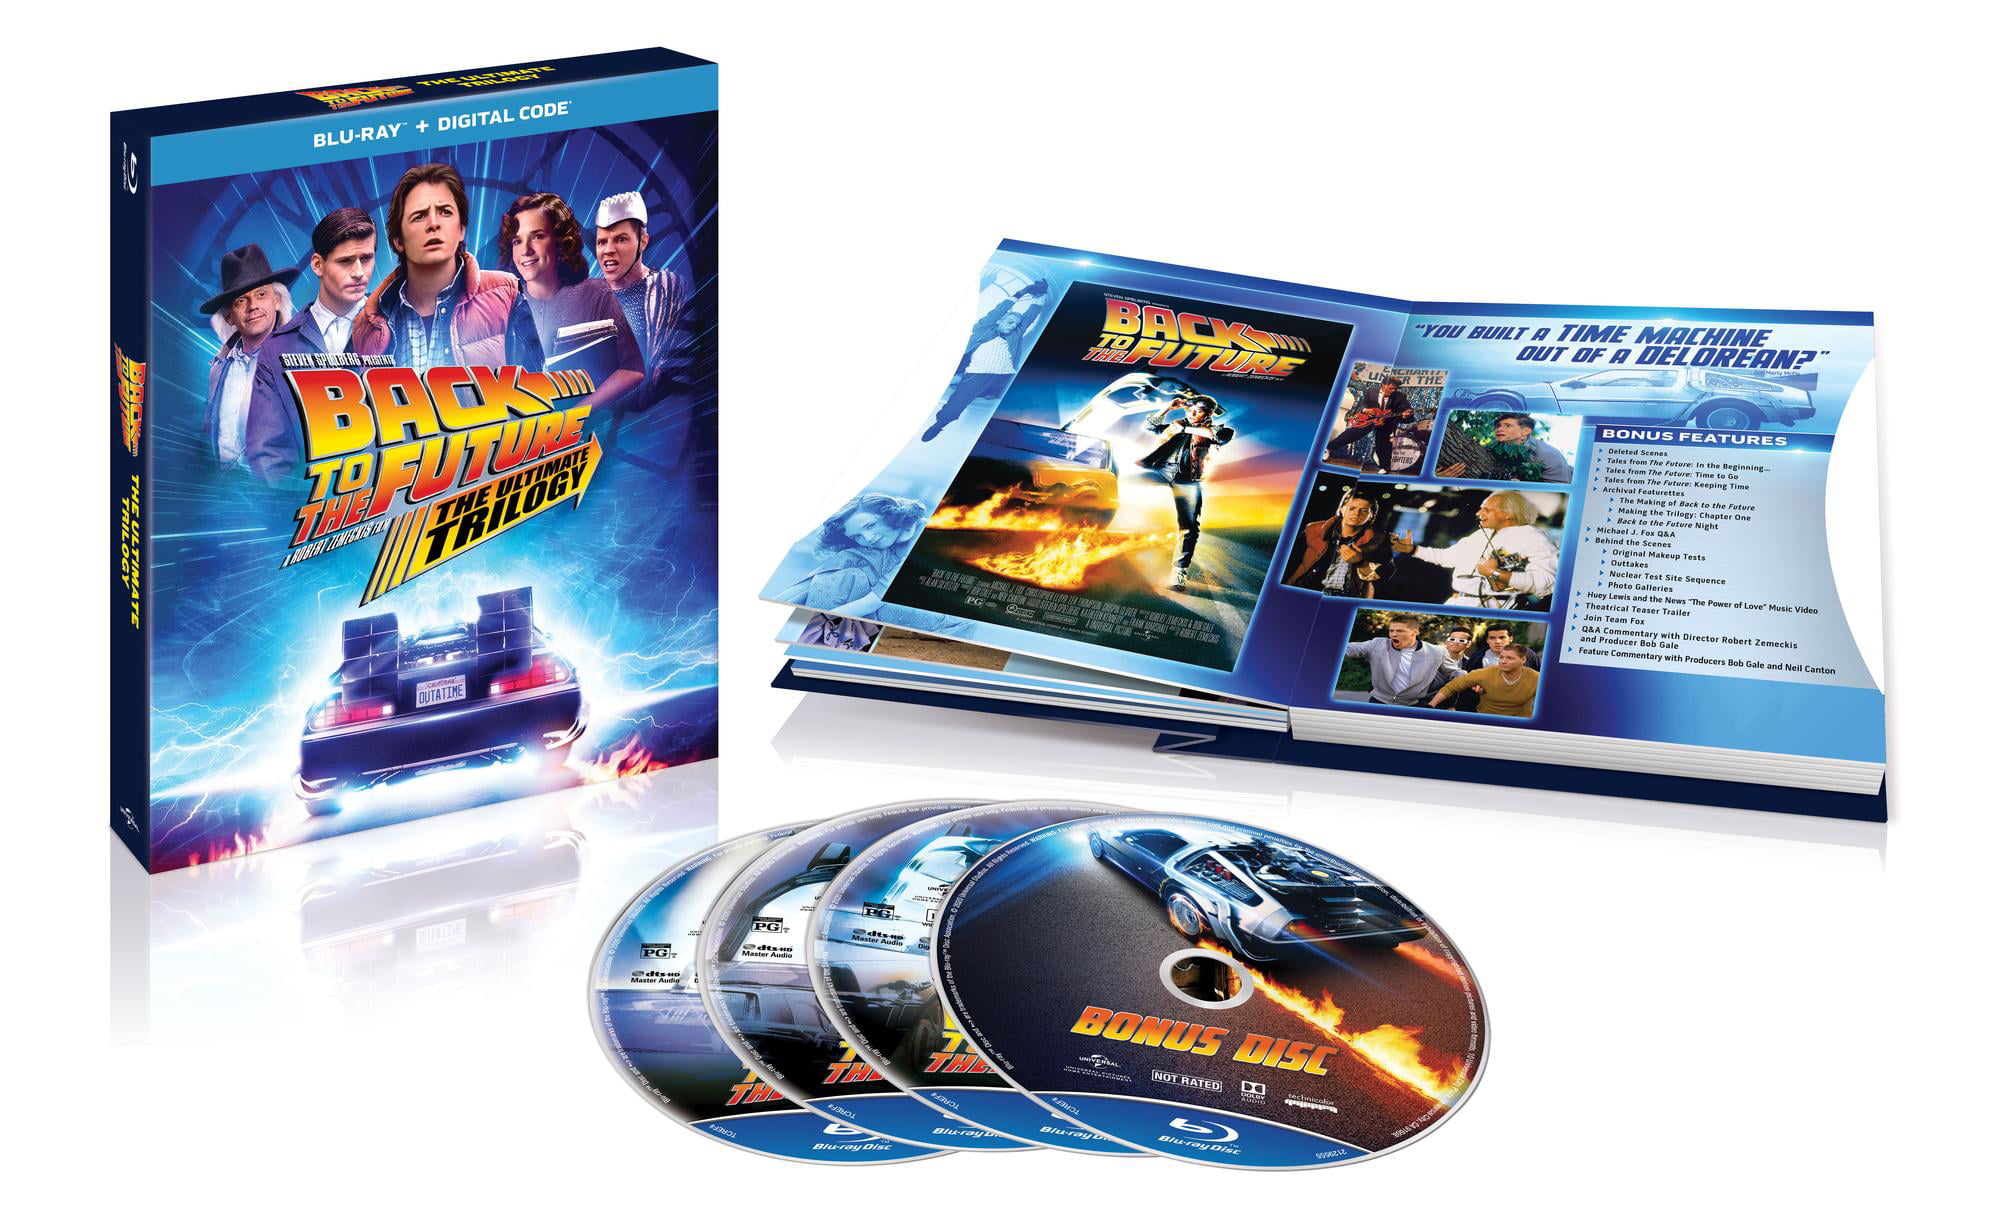 Back to the Future: The Ultimate Trilogy (Blu-Ray + Digital Copy 